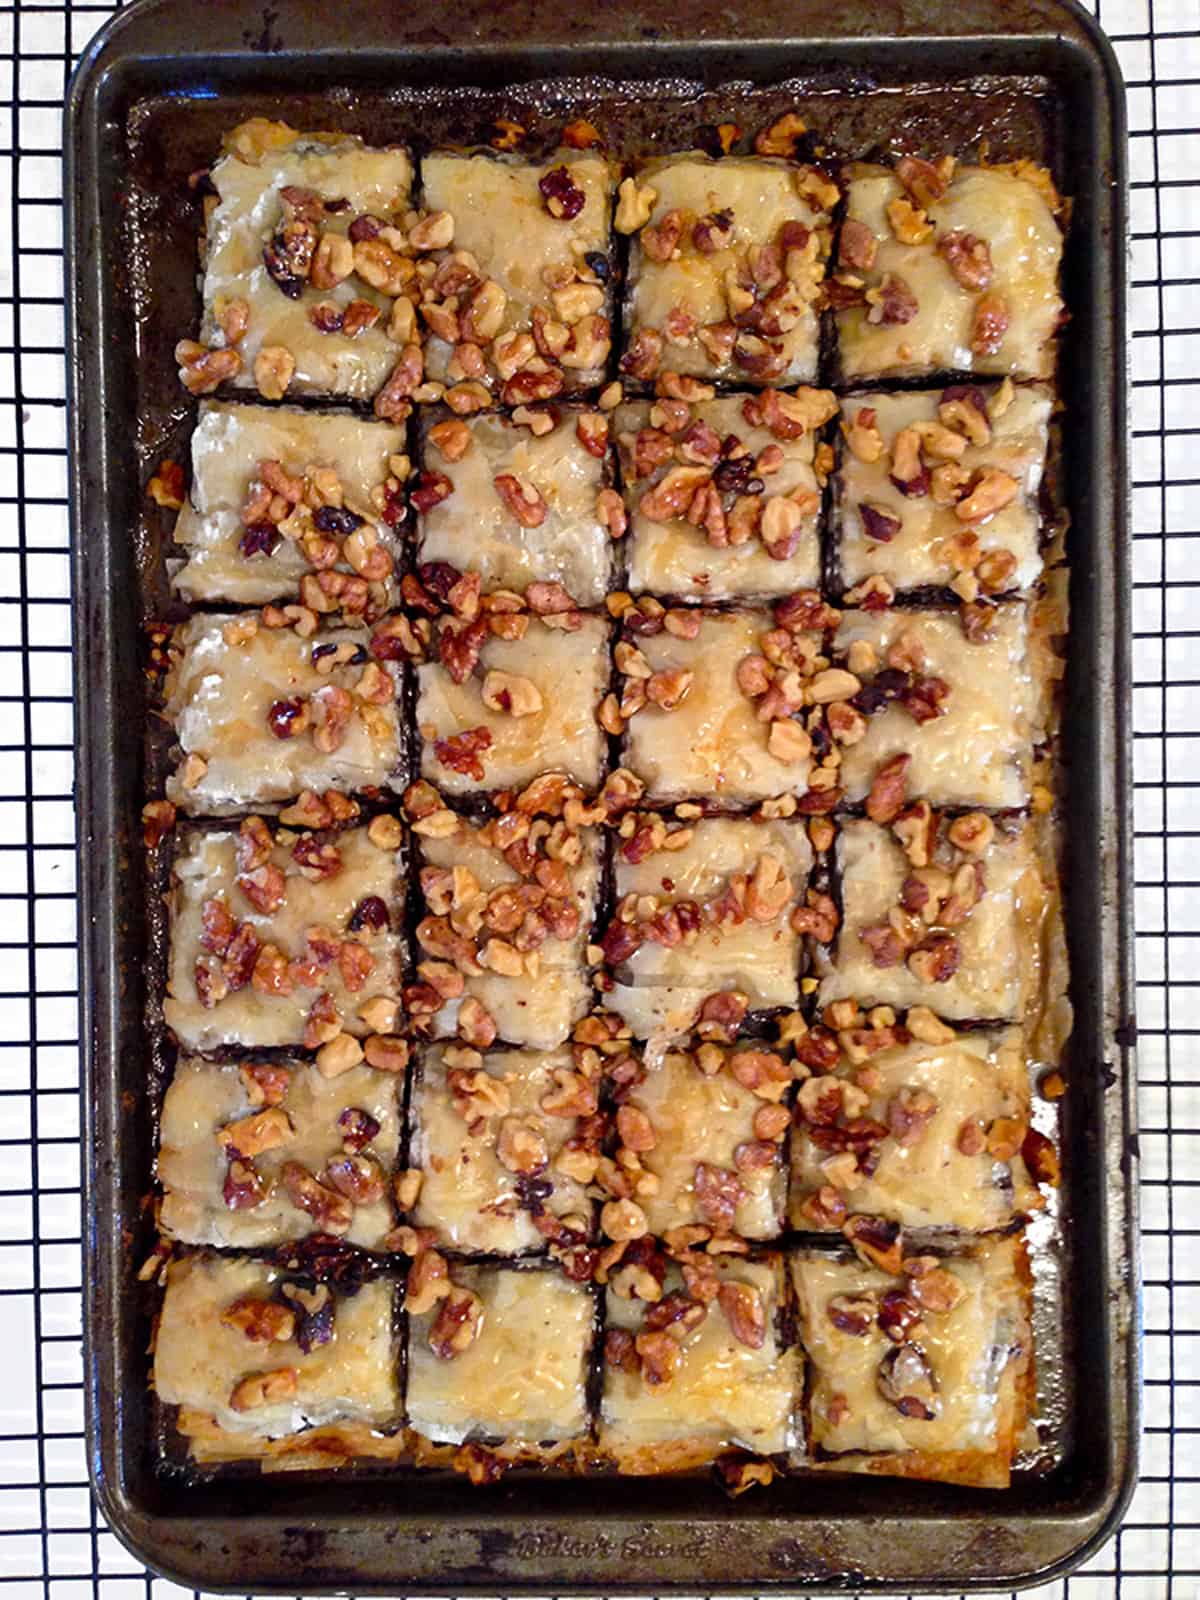 A pan of baklava on a cooling rack.